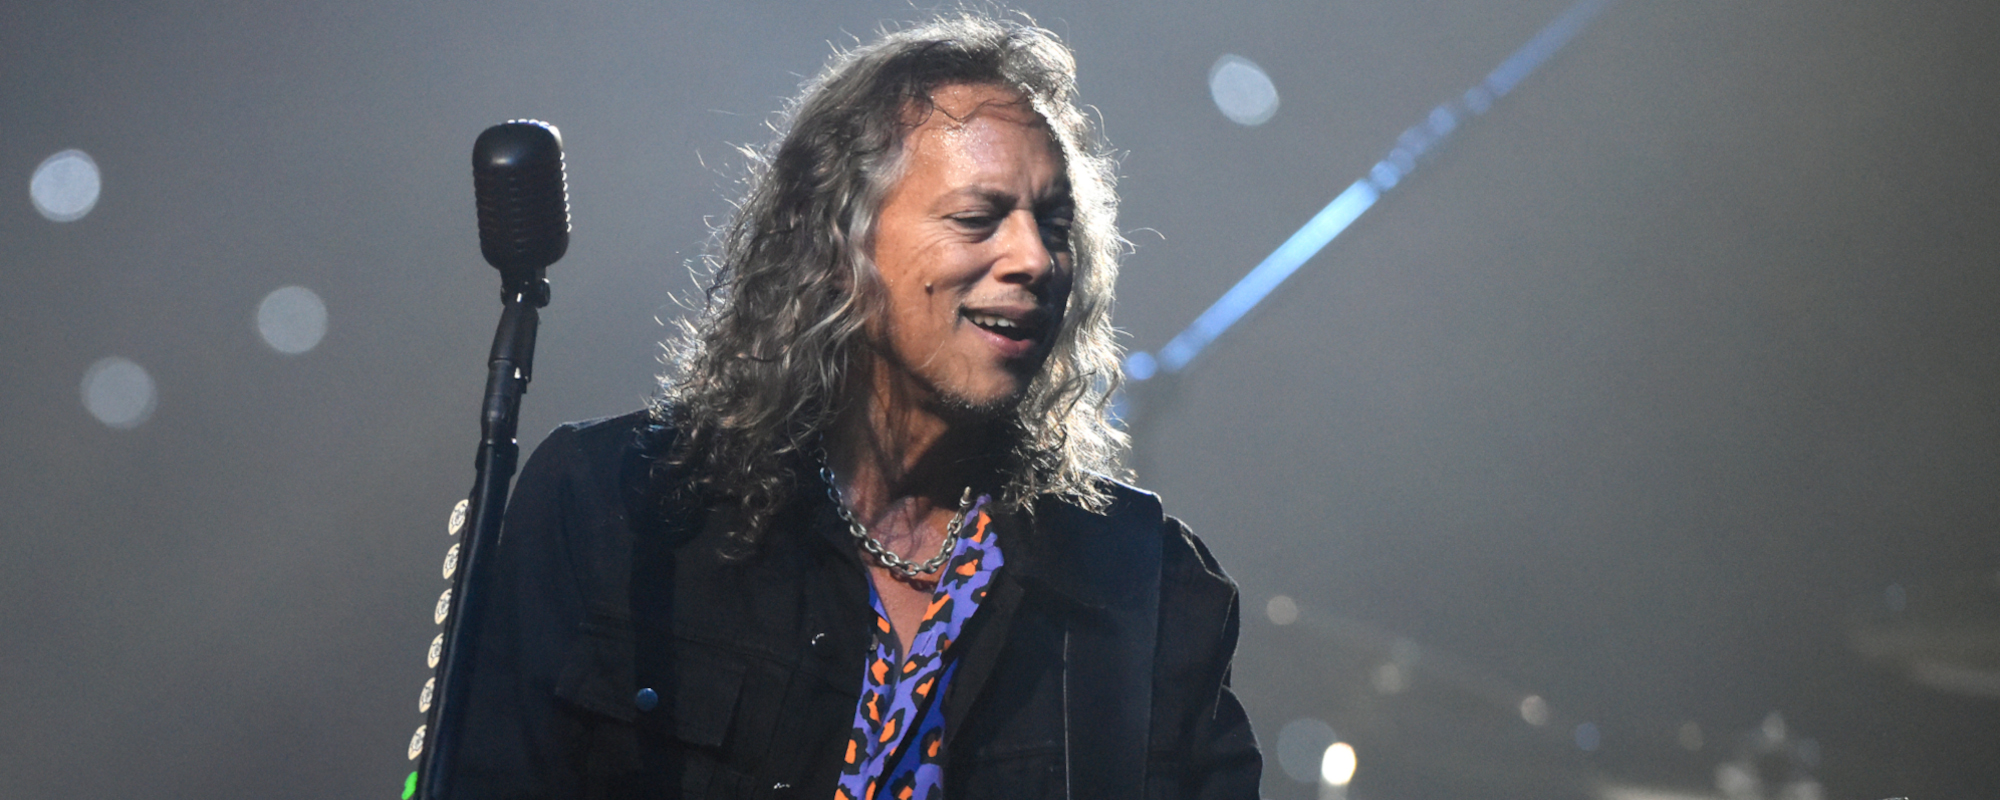 Metallica’s Kirk Hammett Set to Release New Solo EP This Year